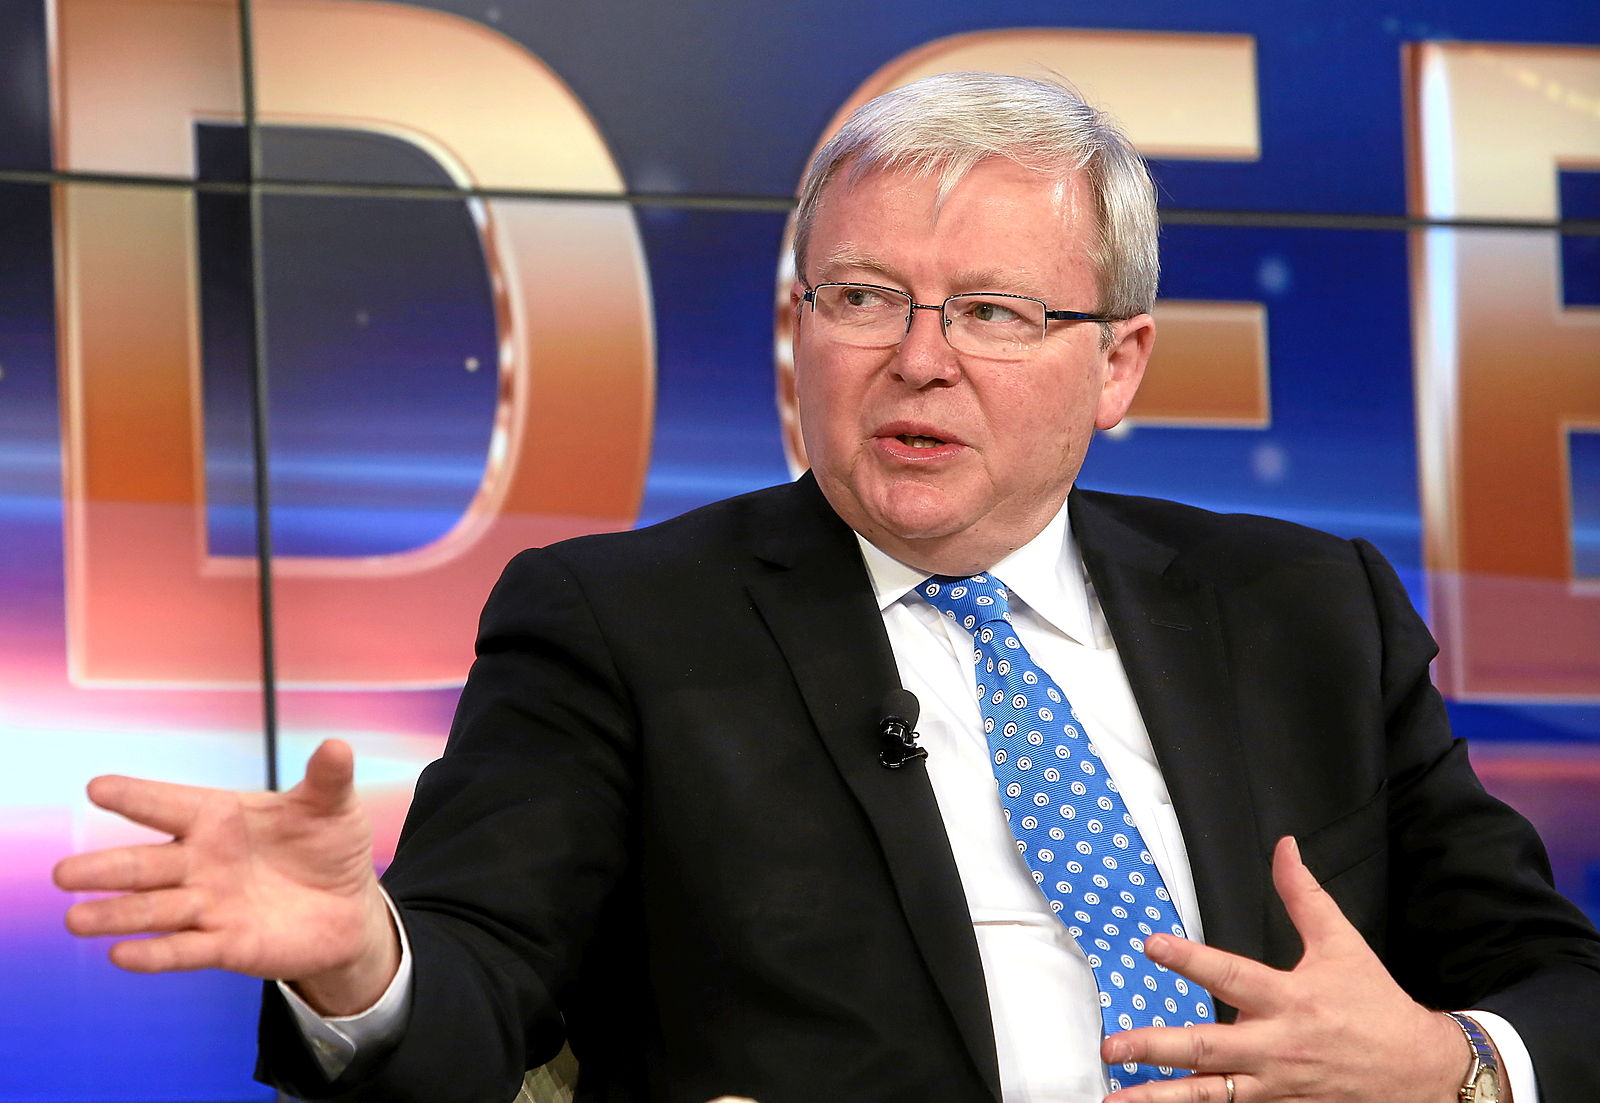 Political Pragmatism in Age of Ideologues: An Interview with Kevin Rudd